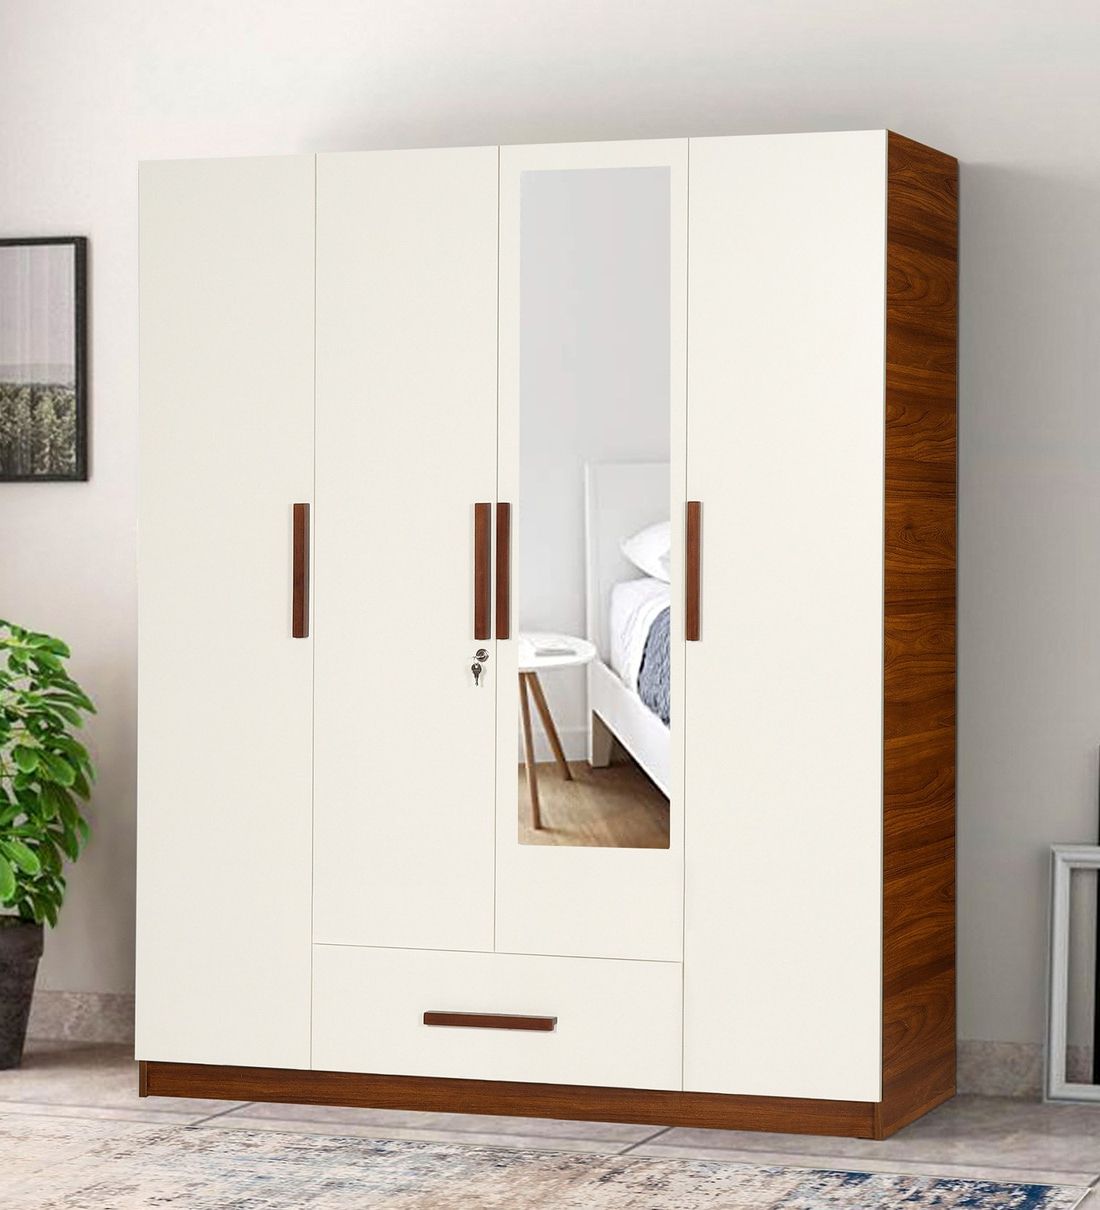 Buy Ozone 4 Door Wardrobe In White Finish With Mirror At 47% Offtrevi  Furniture | Pepperfry For 4 Door Wardrobes With Mirror And Drawers (Gallery 10 of 20)